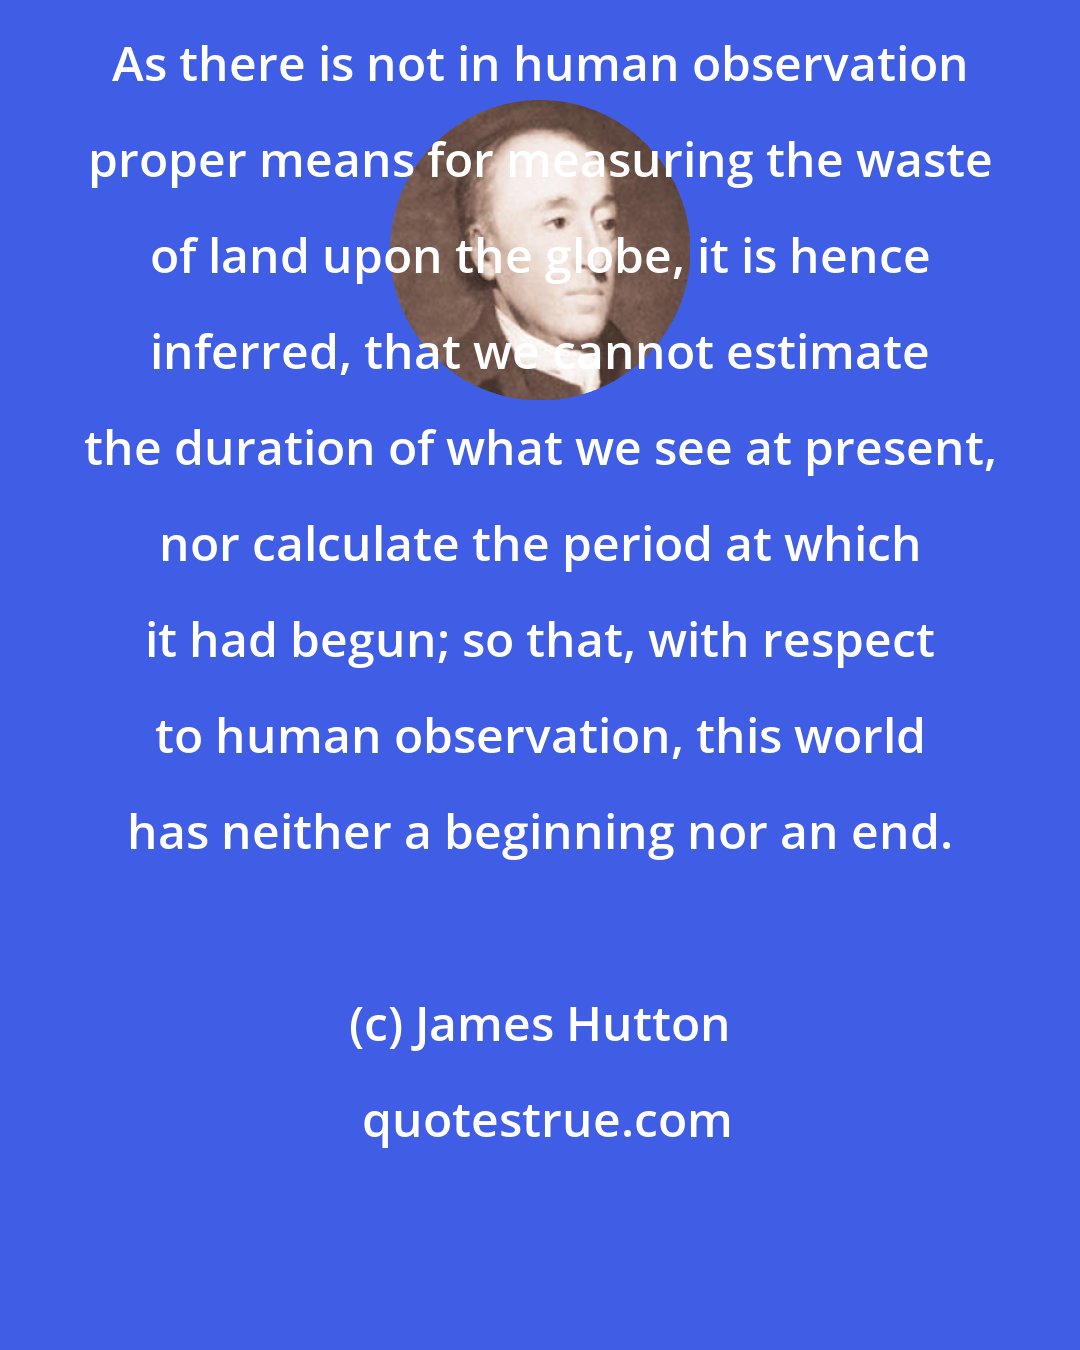 James Hutton: As there is not in human observation proper means for measuring the waste of land upon the globe, it is hence inferred, that we cannot estimate the duration of what we see at present, nor calculate the period at which it had begun; so that, with respect to human observation, this world has neither a beginning nor an end.